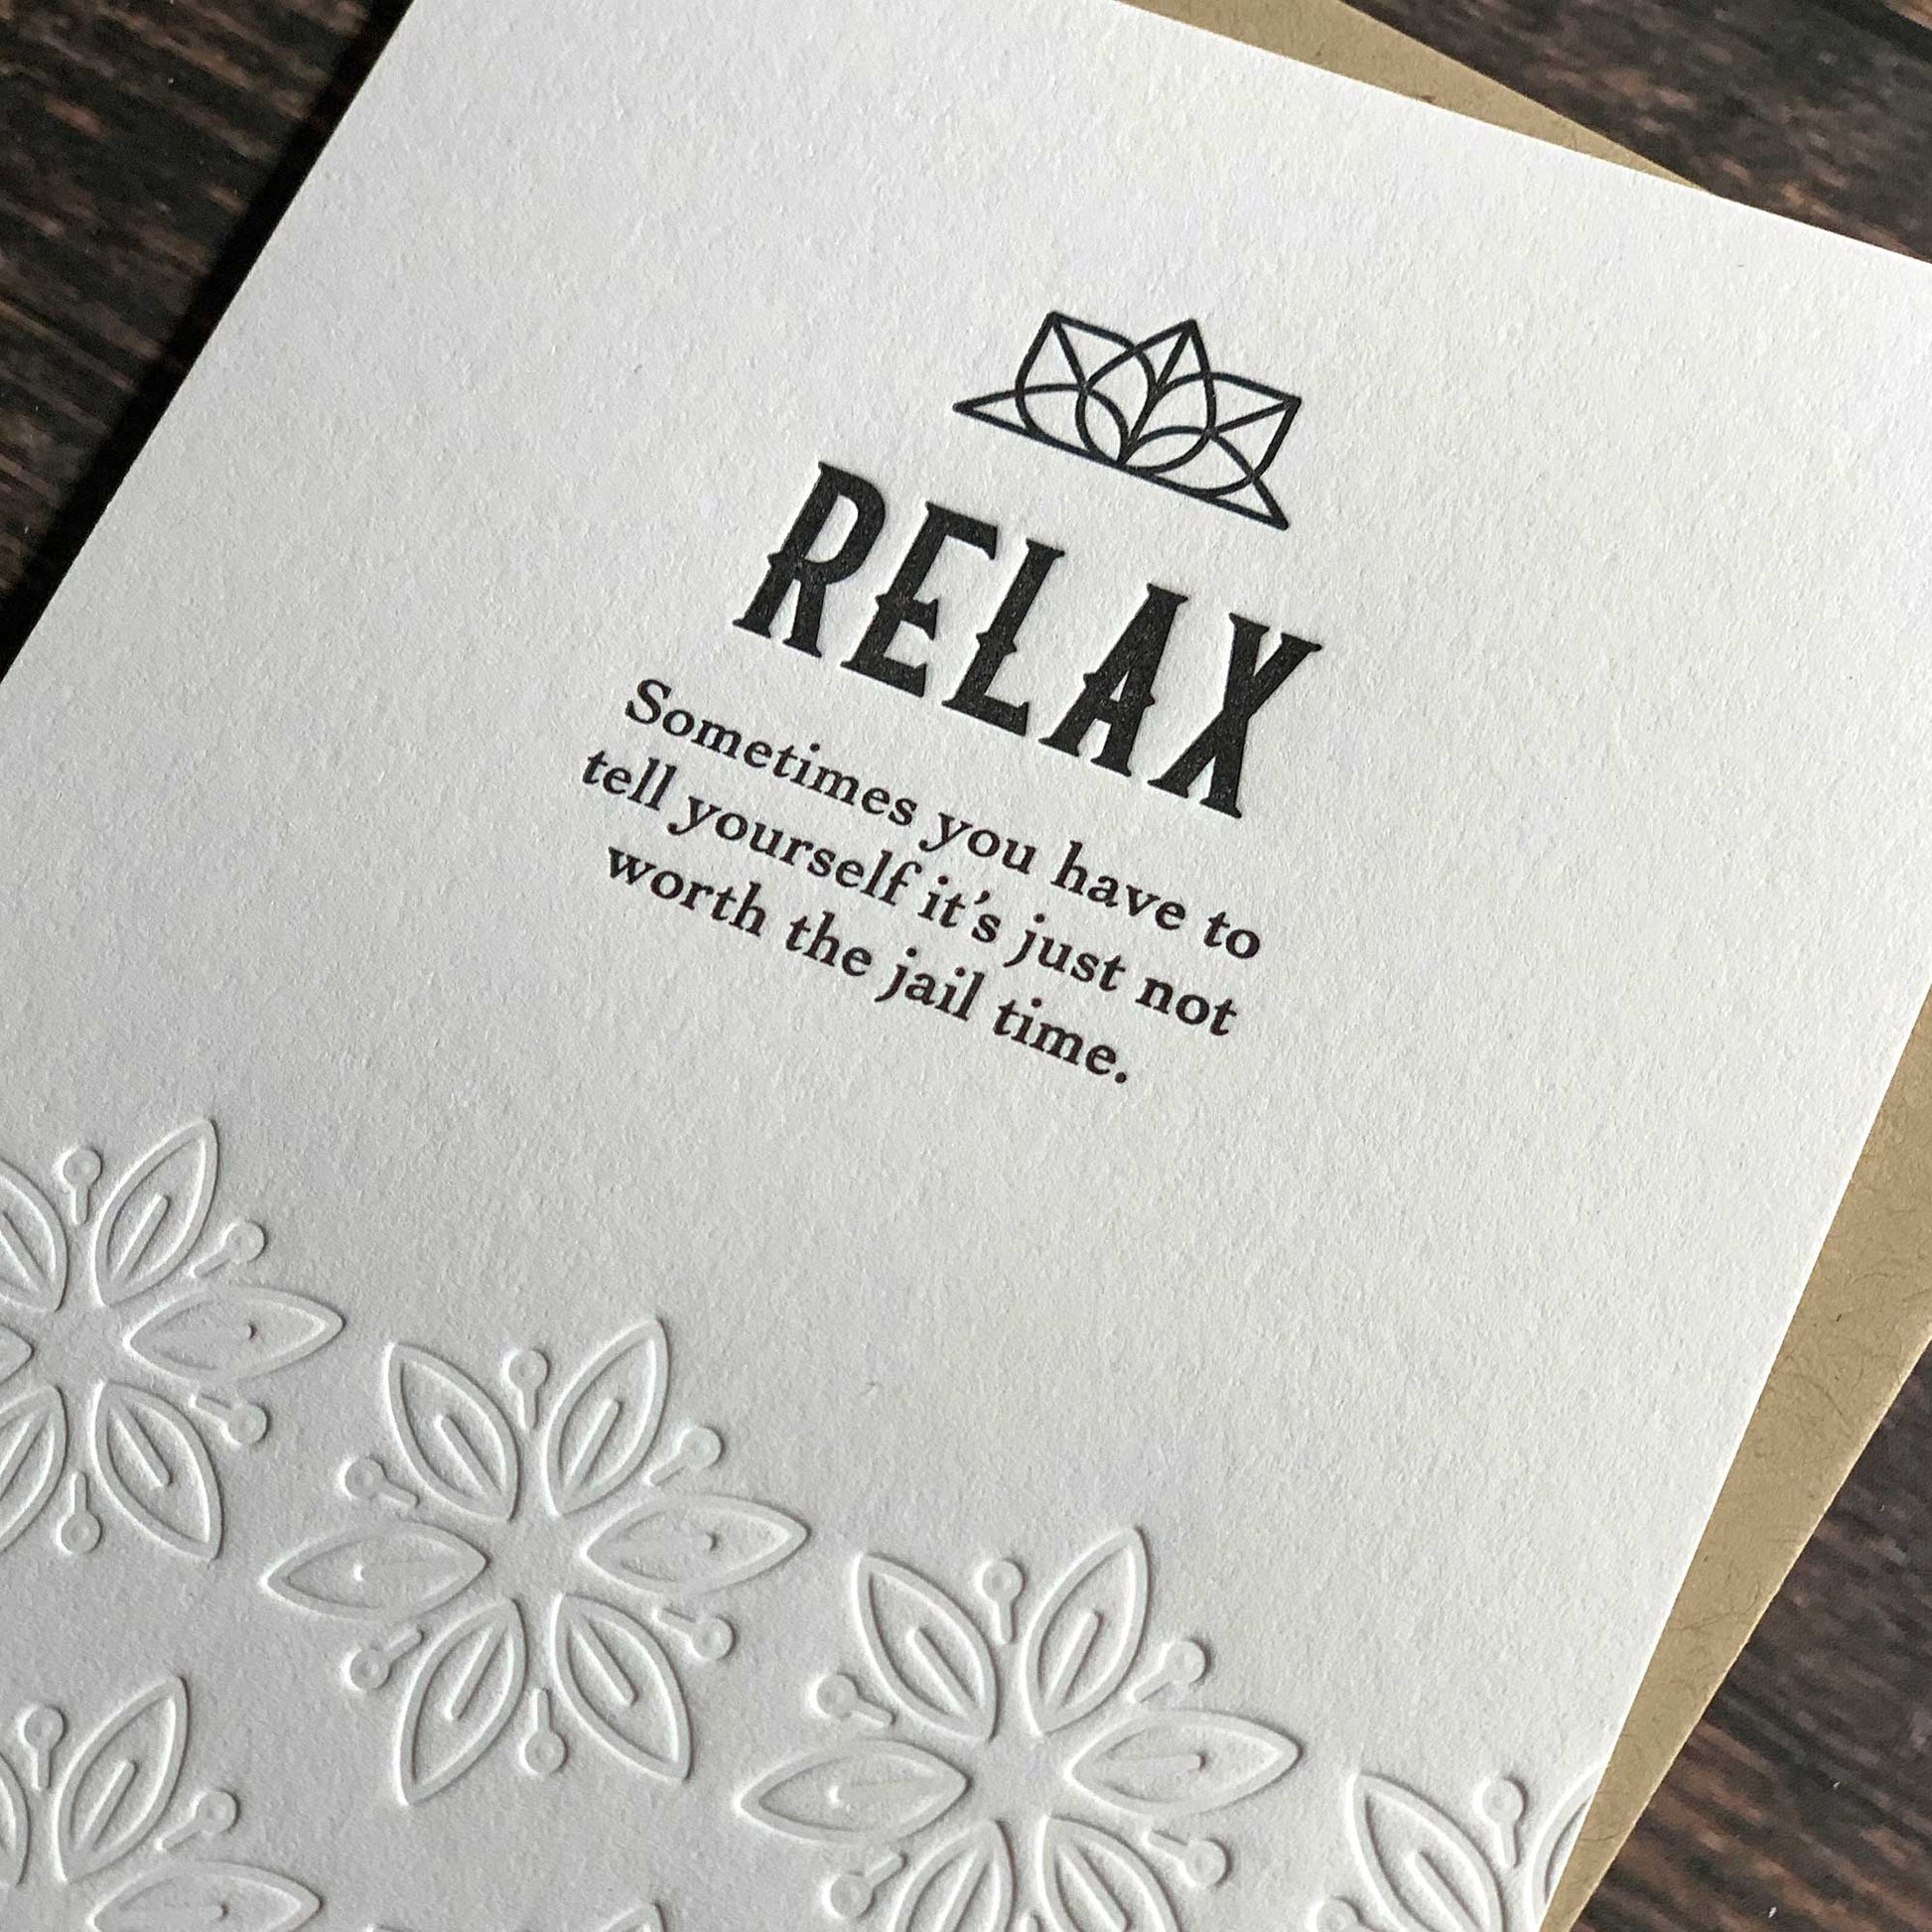 Relax. Sometimes you have to tell yourself it's just not worth the jail time, Funny encouragement Card, Letterpress printed, view shows letterpress impression, includes envelope